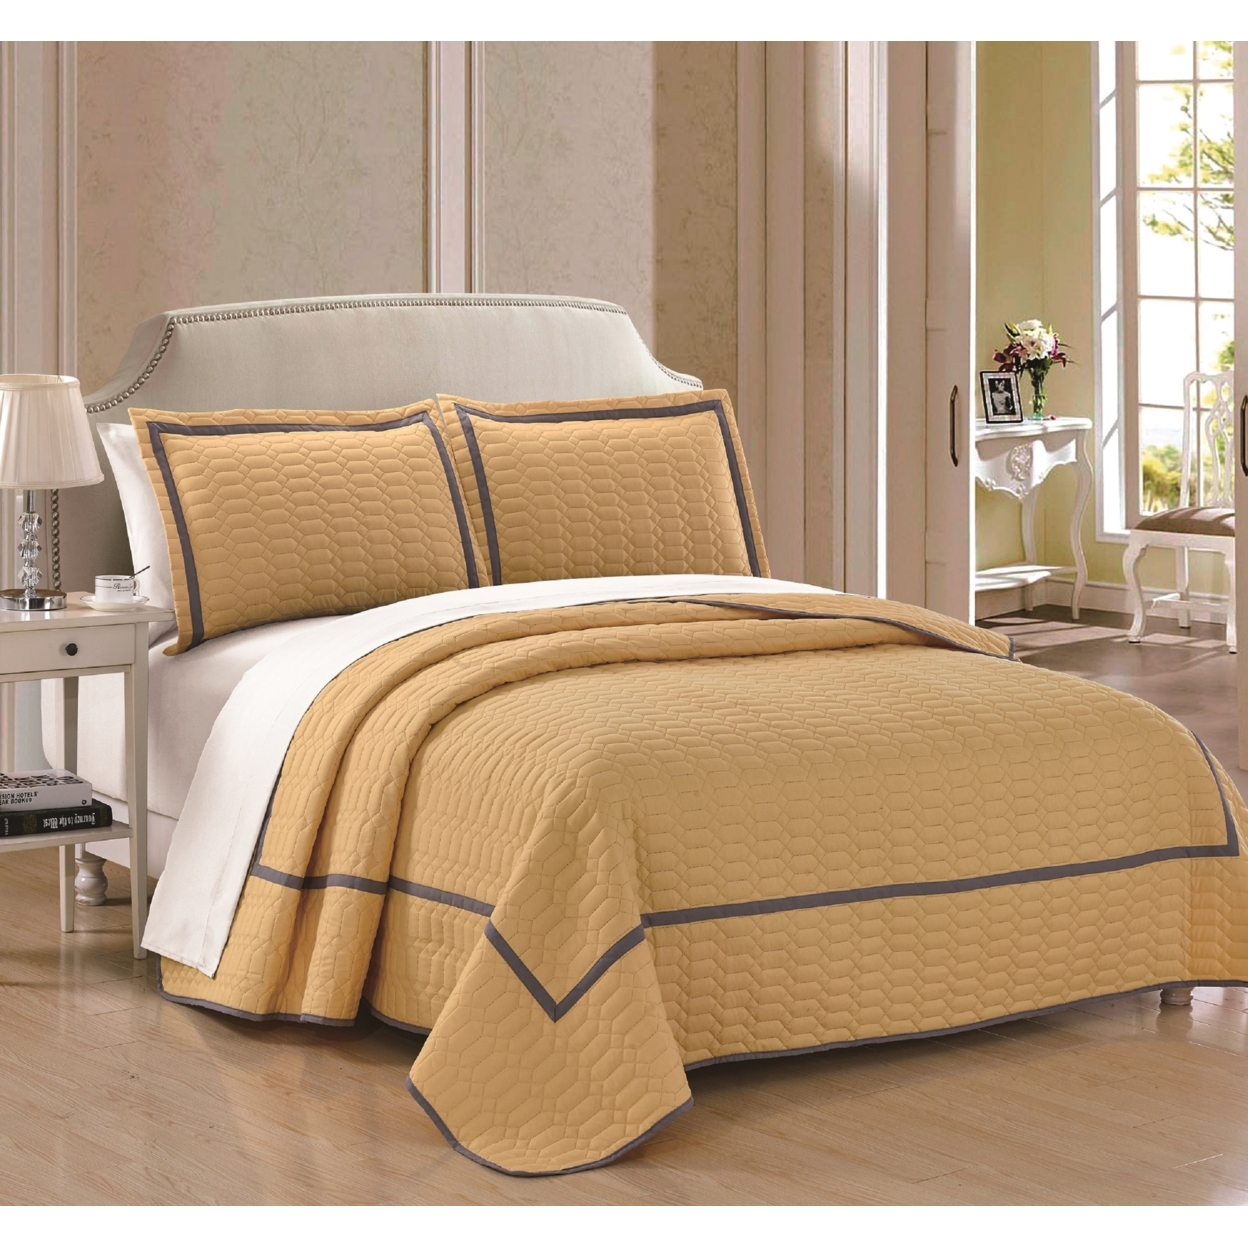 3 Or 2 Piece Halrowe Hotel Collection 2 Tone Banded Quilted Geometrical Embroidered Quilt Set - Yellow, Twin